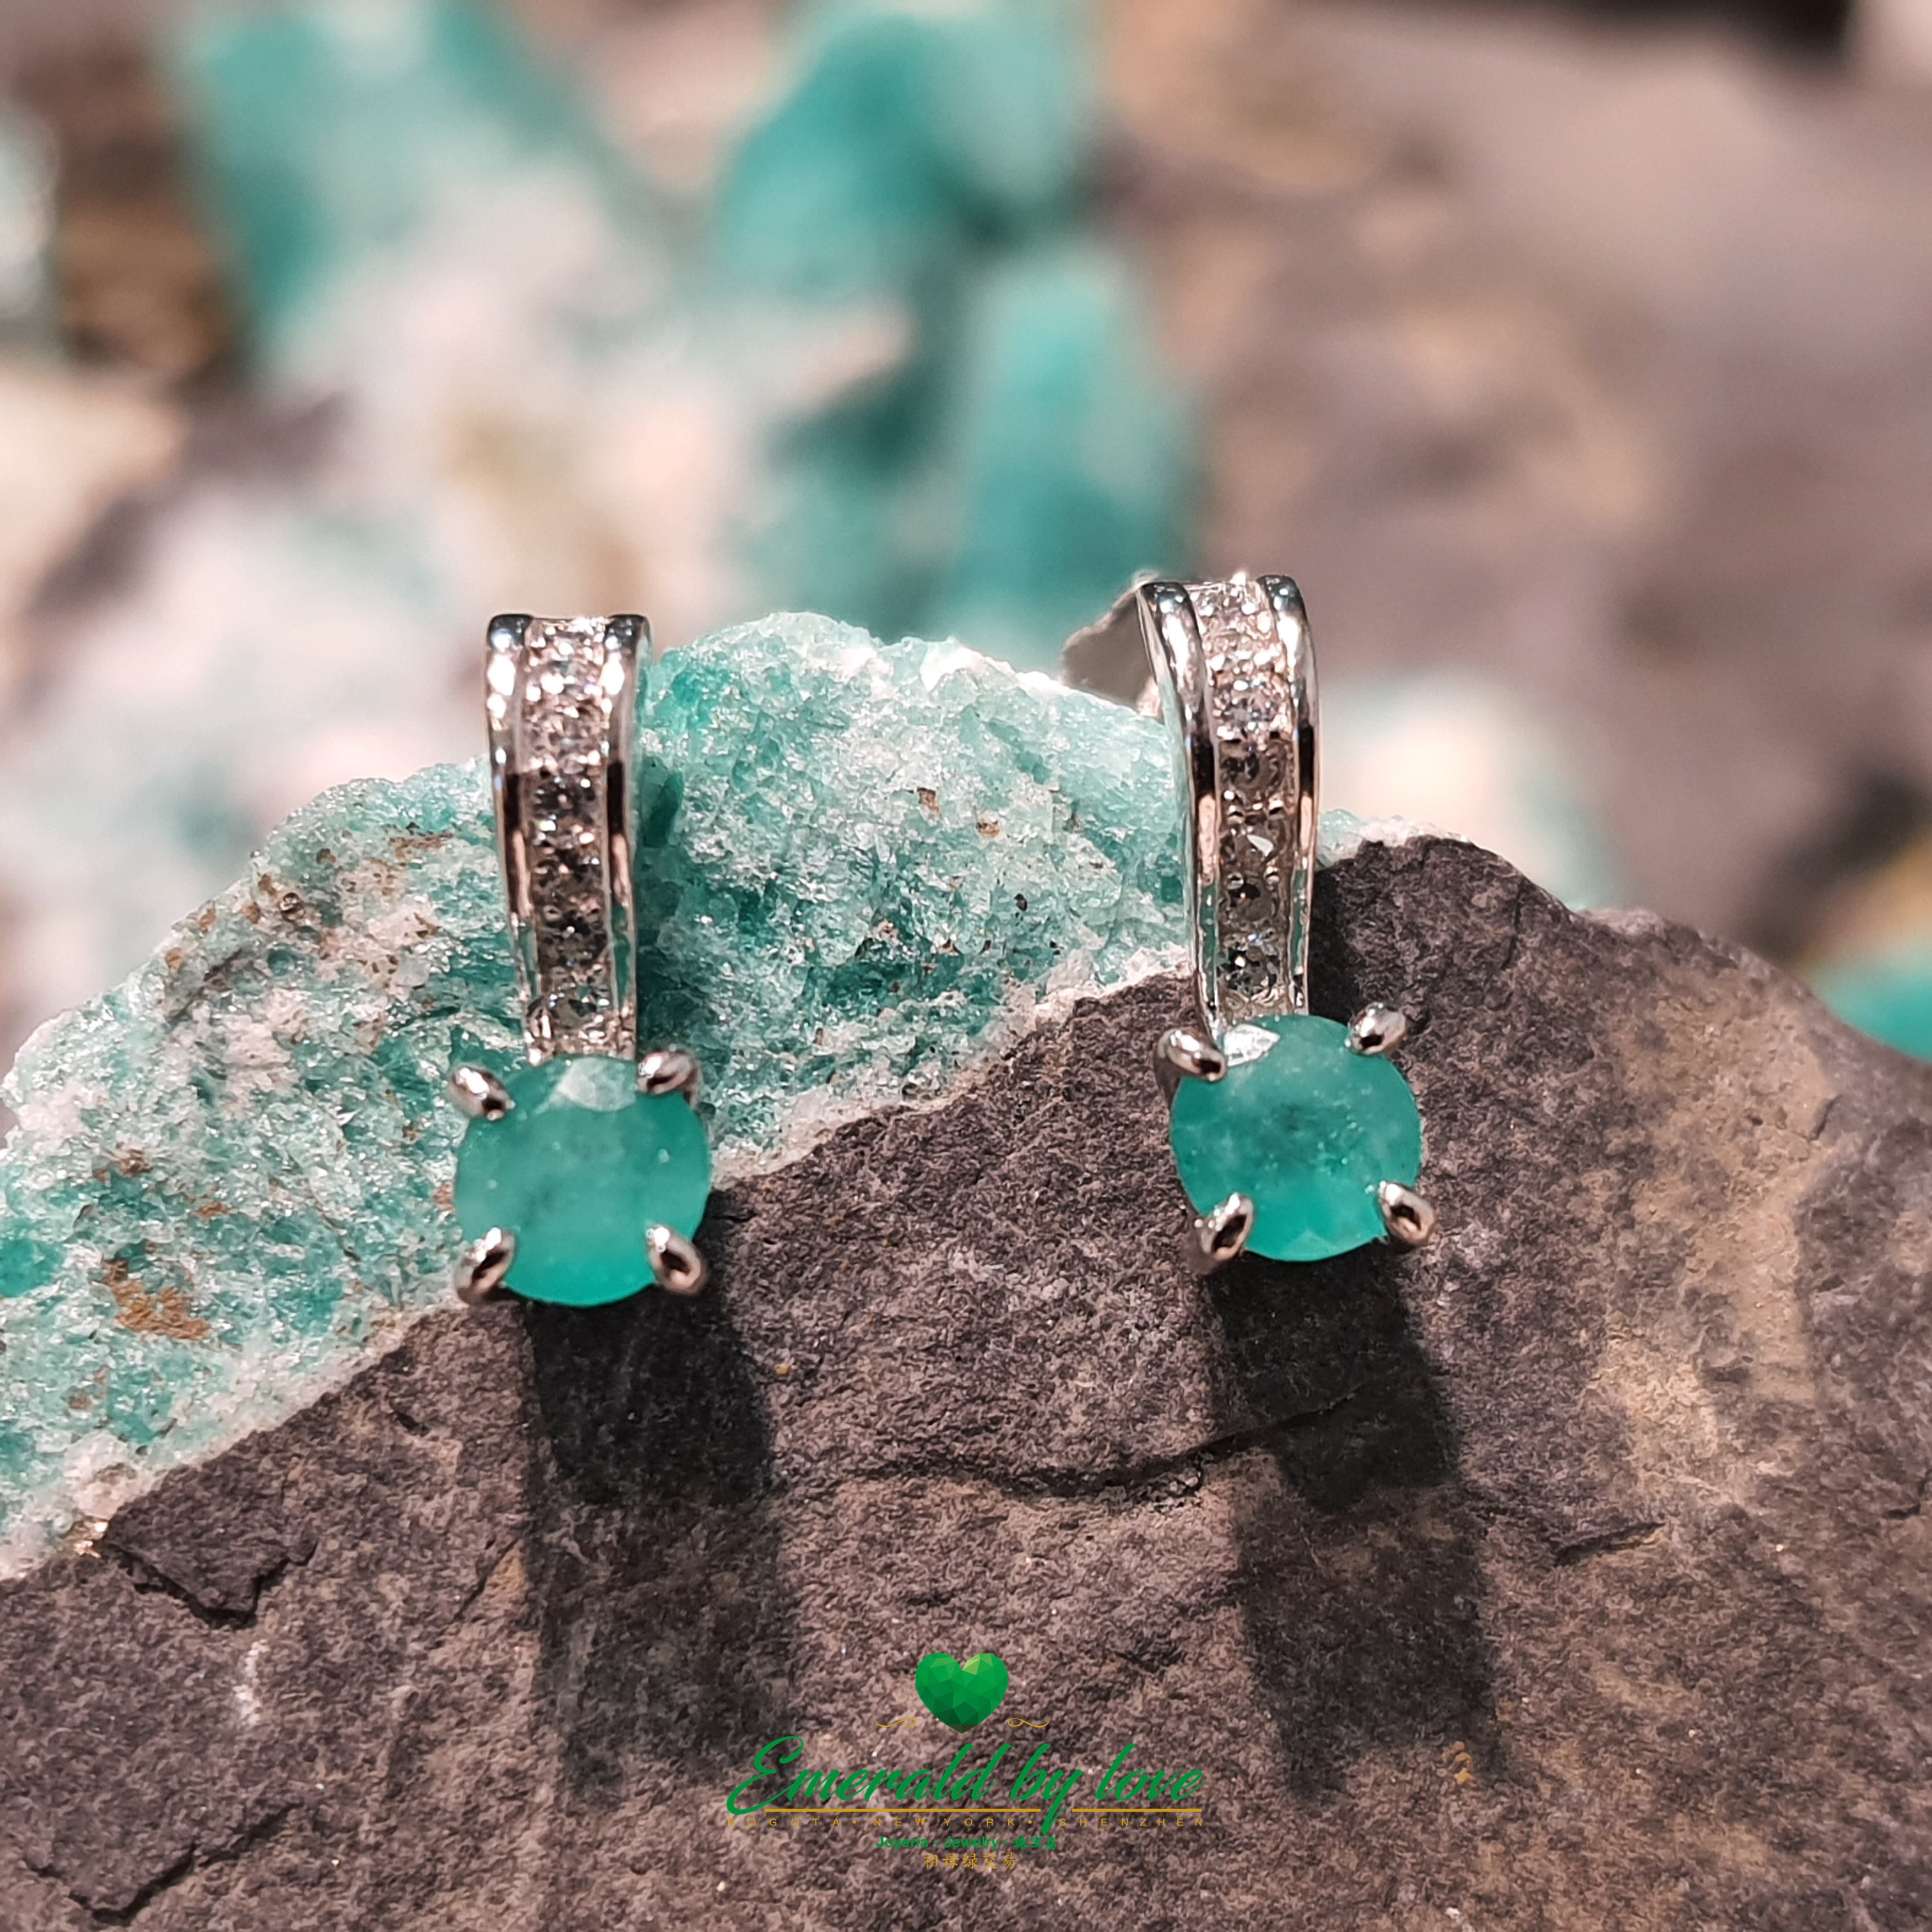 Elongated Sterling Silver Earrings with Round Colombian Emerald and Cubic Zirconia